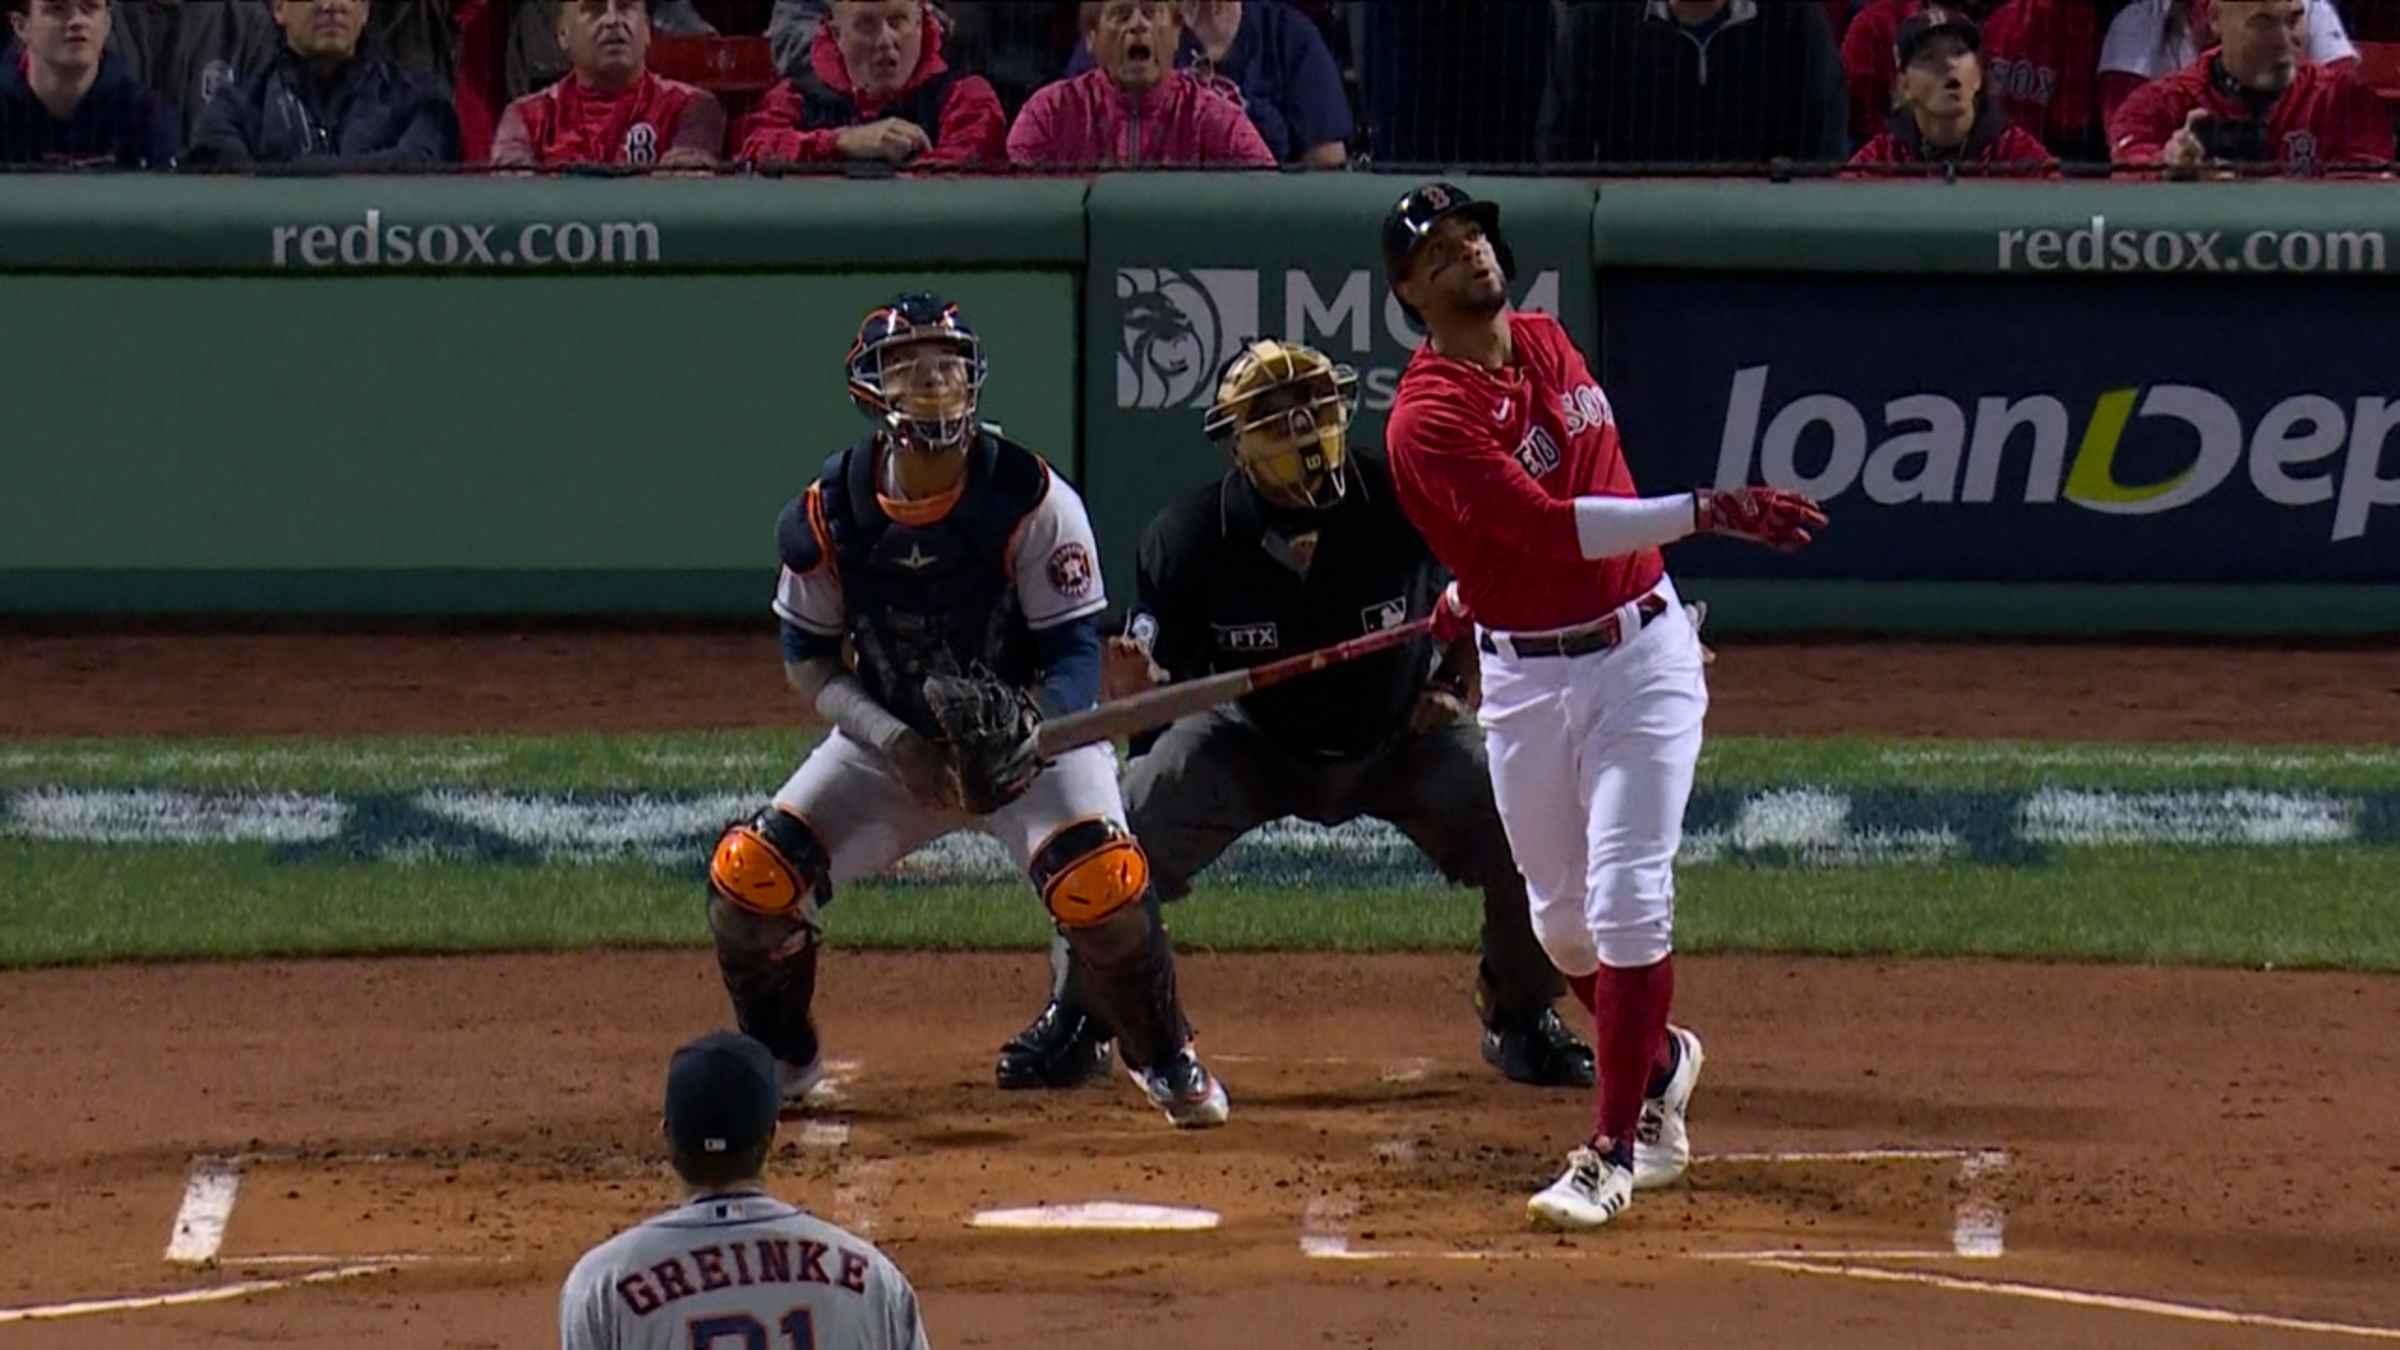 Watch Xander Bogaerts Give Red Sox Lead With Monster Solo Home Run